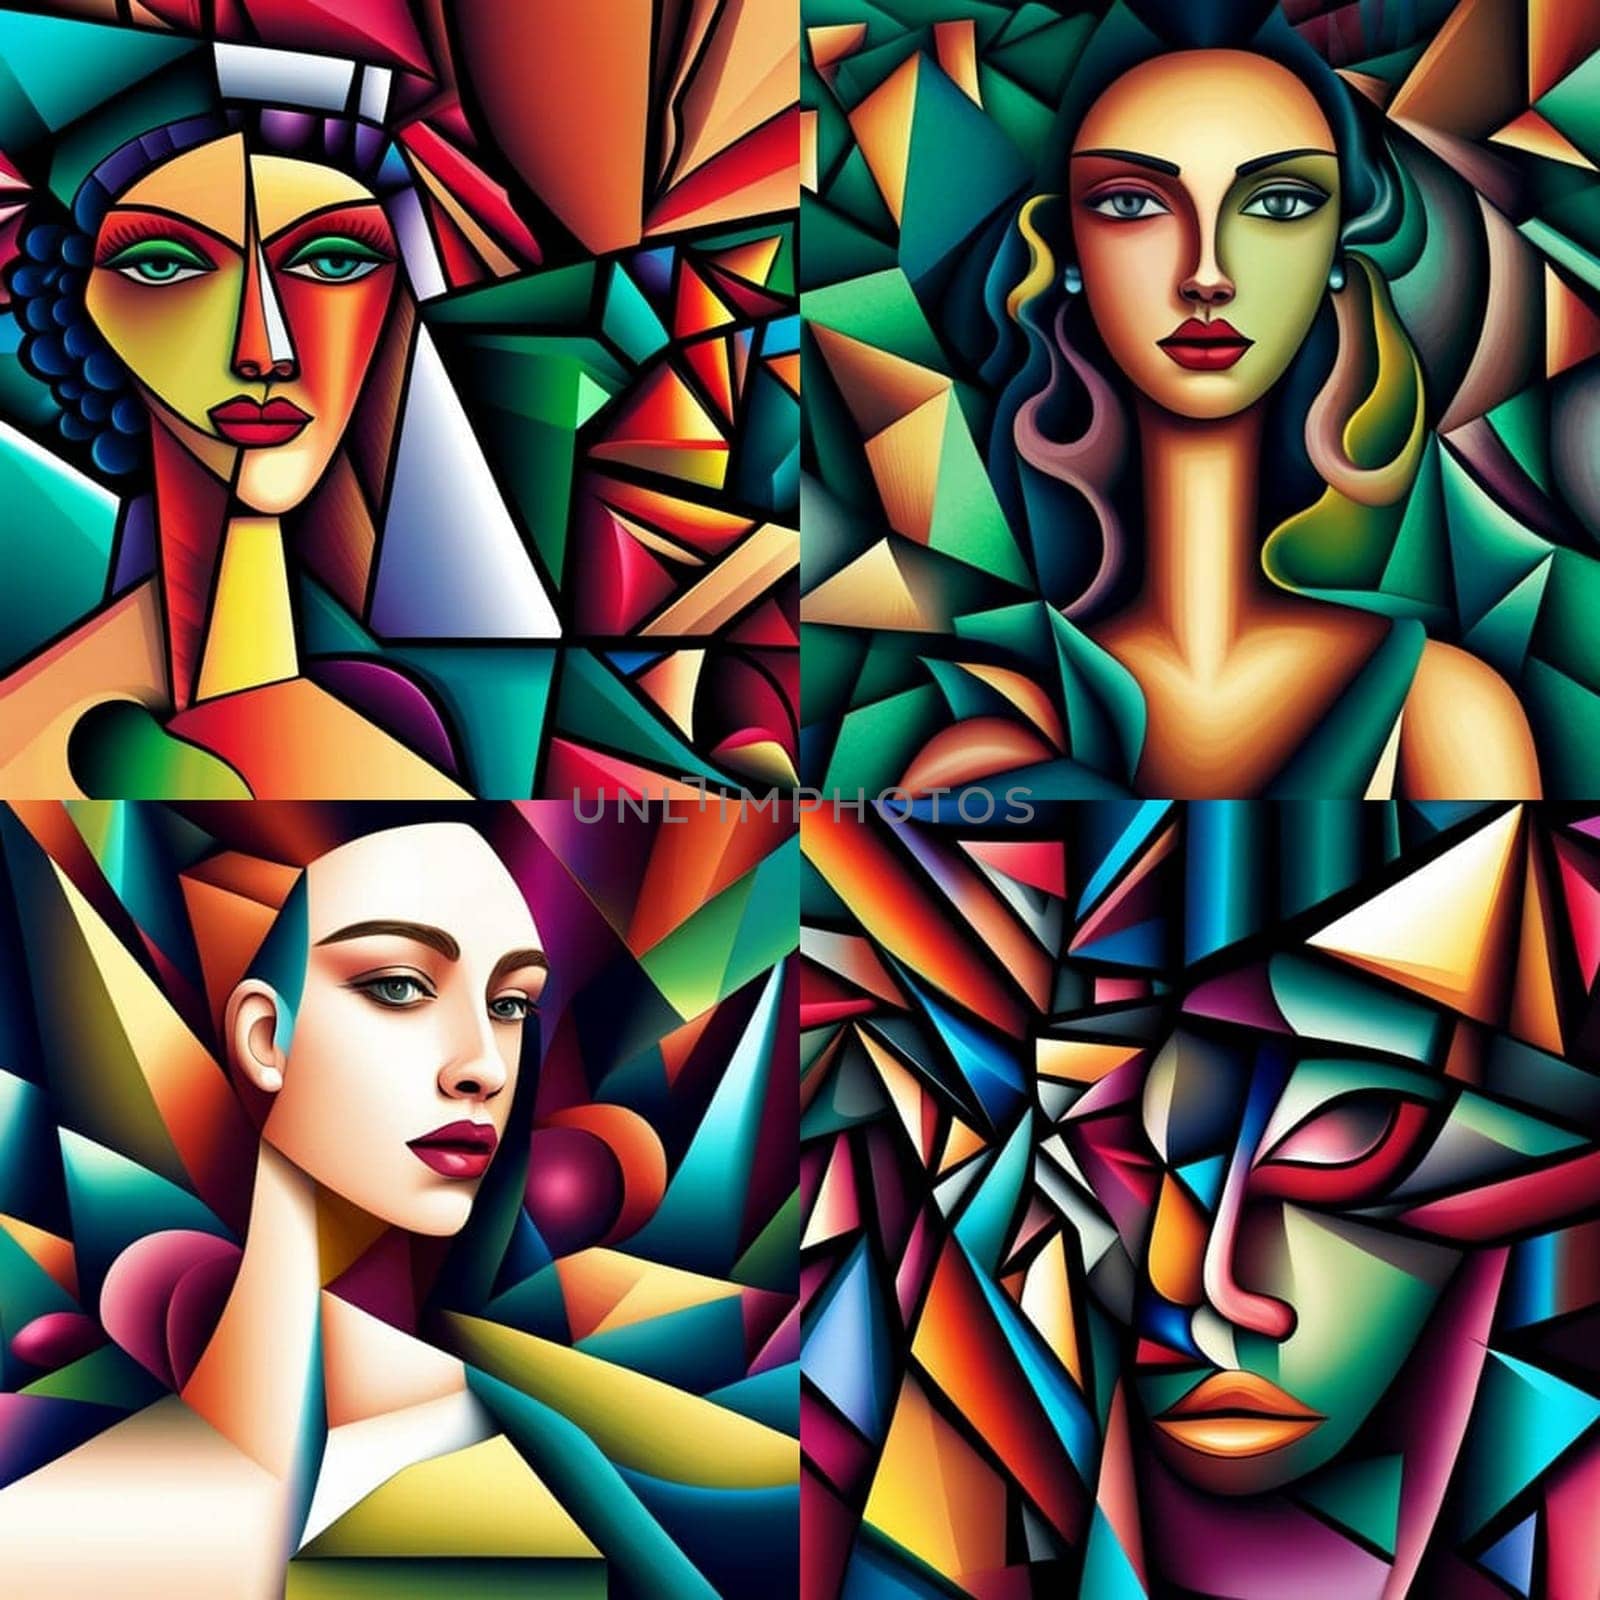 Collage of female portraits painting in the style of cubism in vibrant colors.